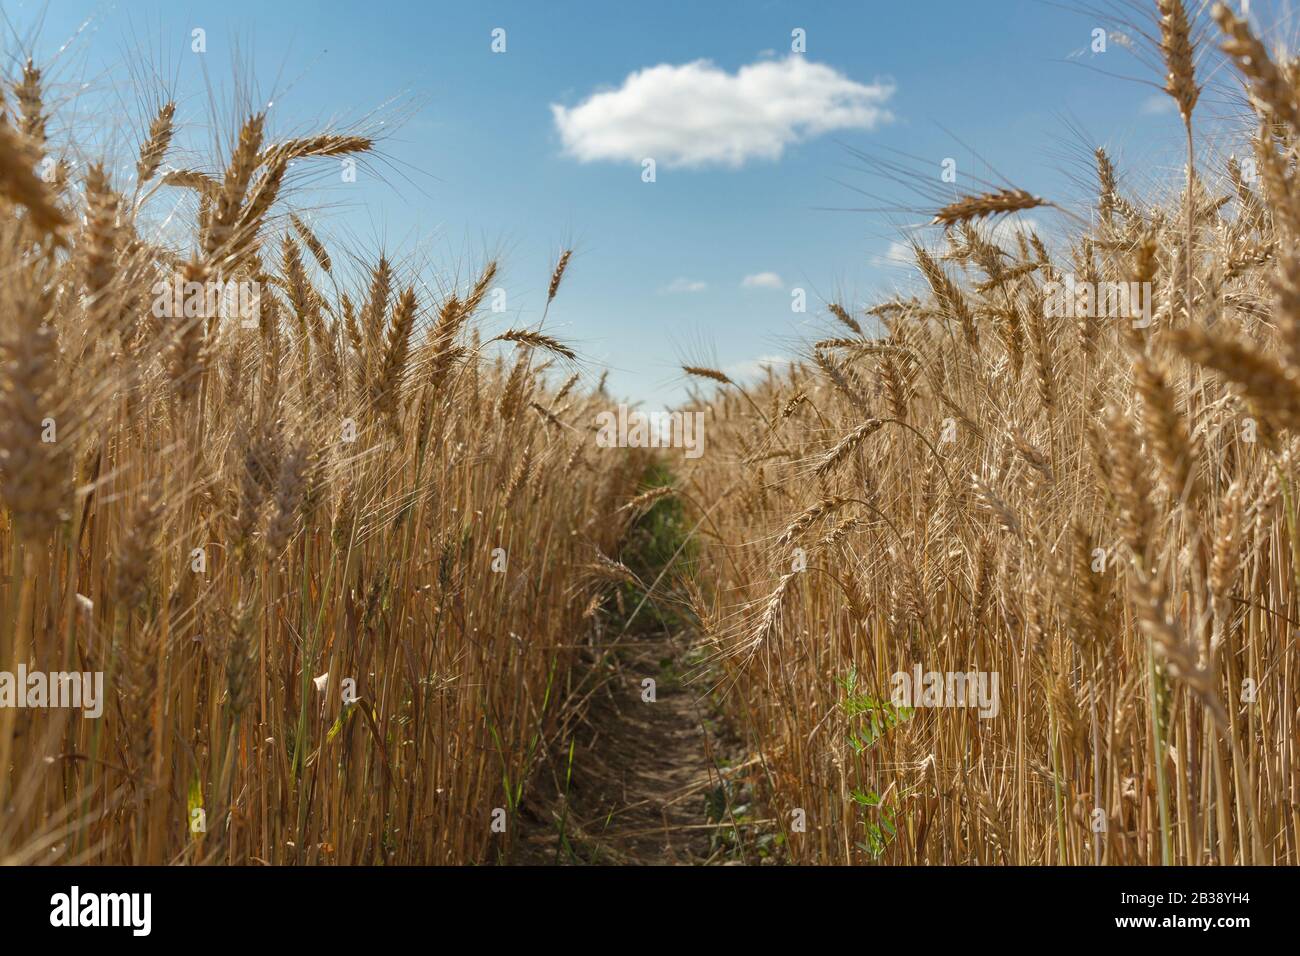 Wheat field with sky and clouds from the frog perspective Stock Photo